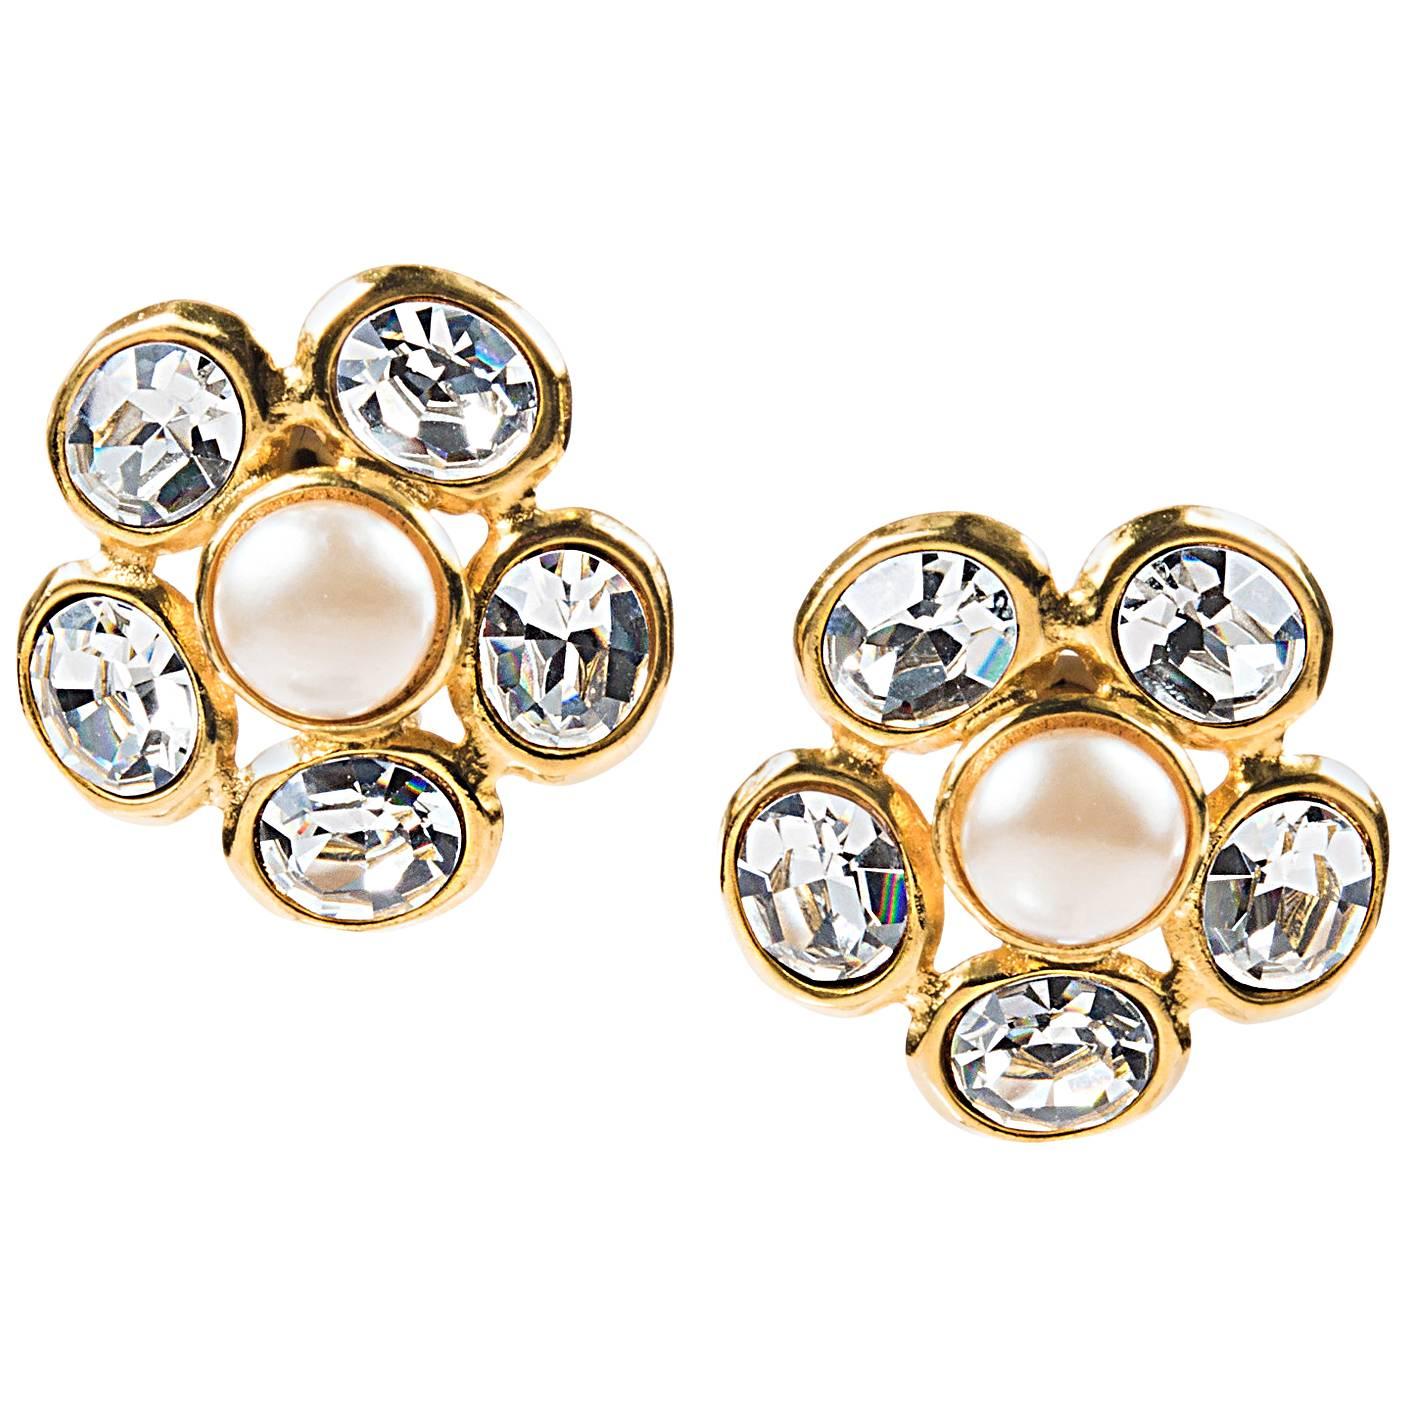 Vintage Chanel Gold Tone Metal Faux Pearl Large Crystal Clip On Earrings For Sale